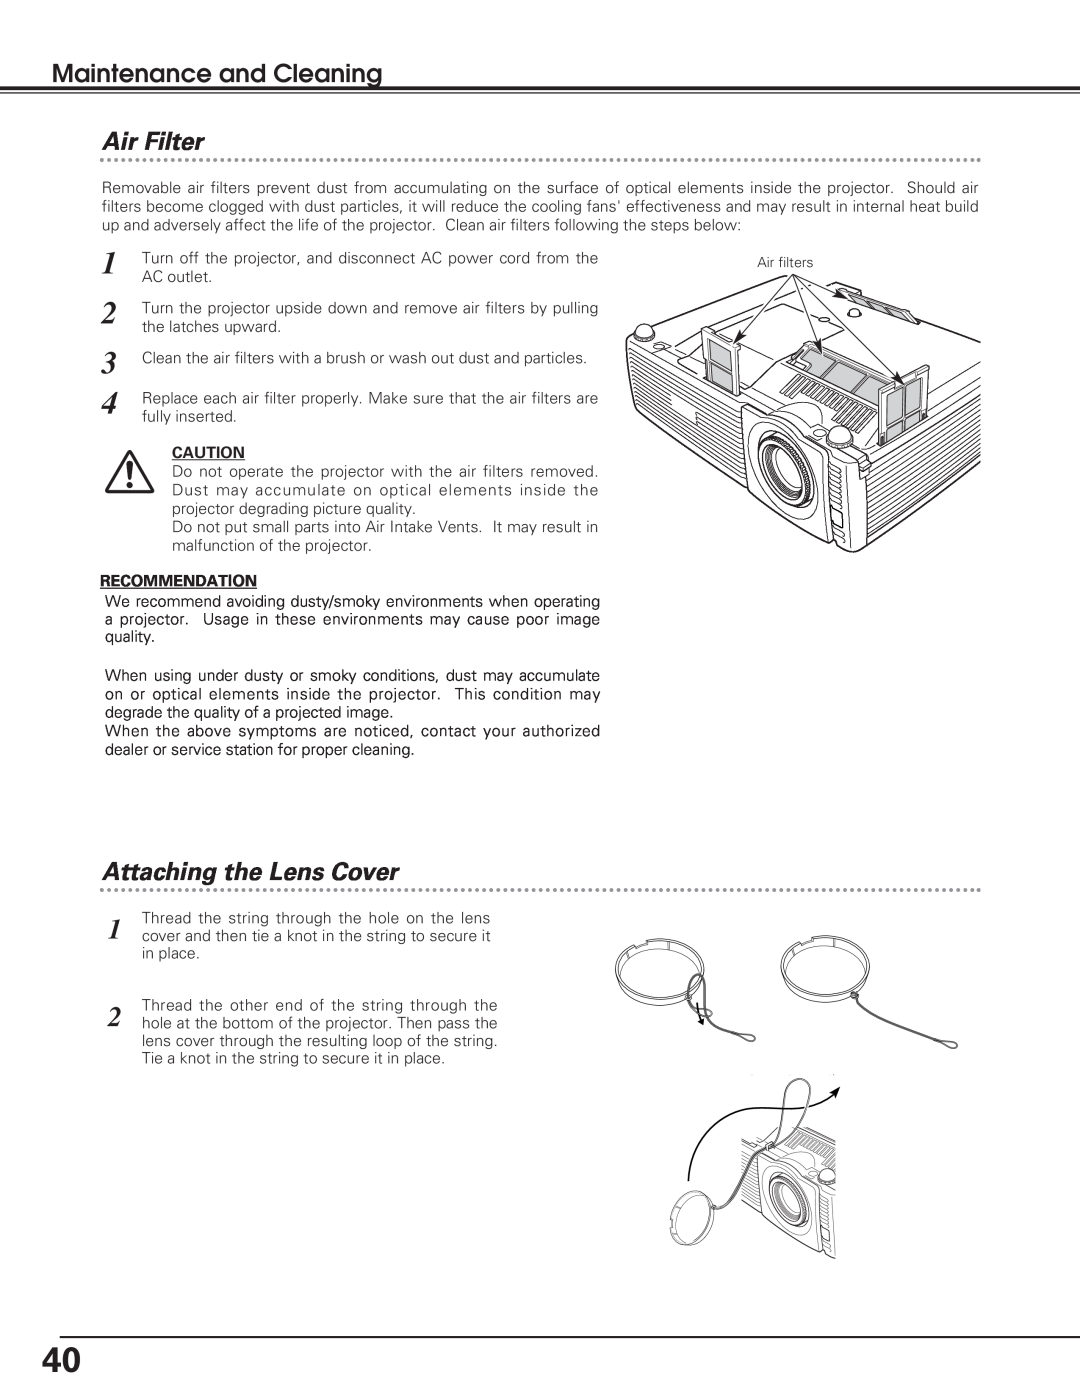 Eiki LC-SD12 owner manual Maintenance and Cleaning, Air Filter, Attaching the Lens Cover 